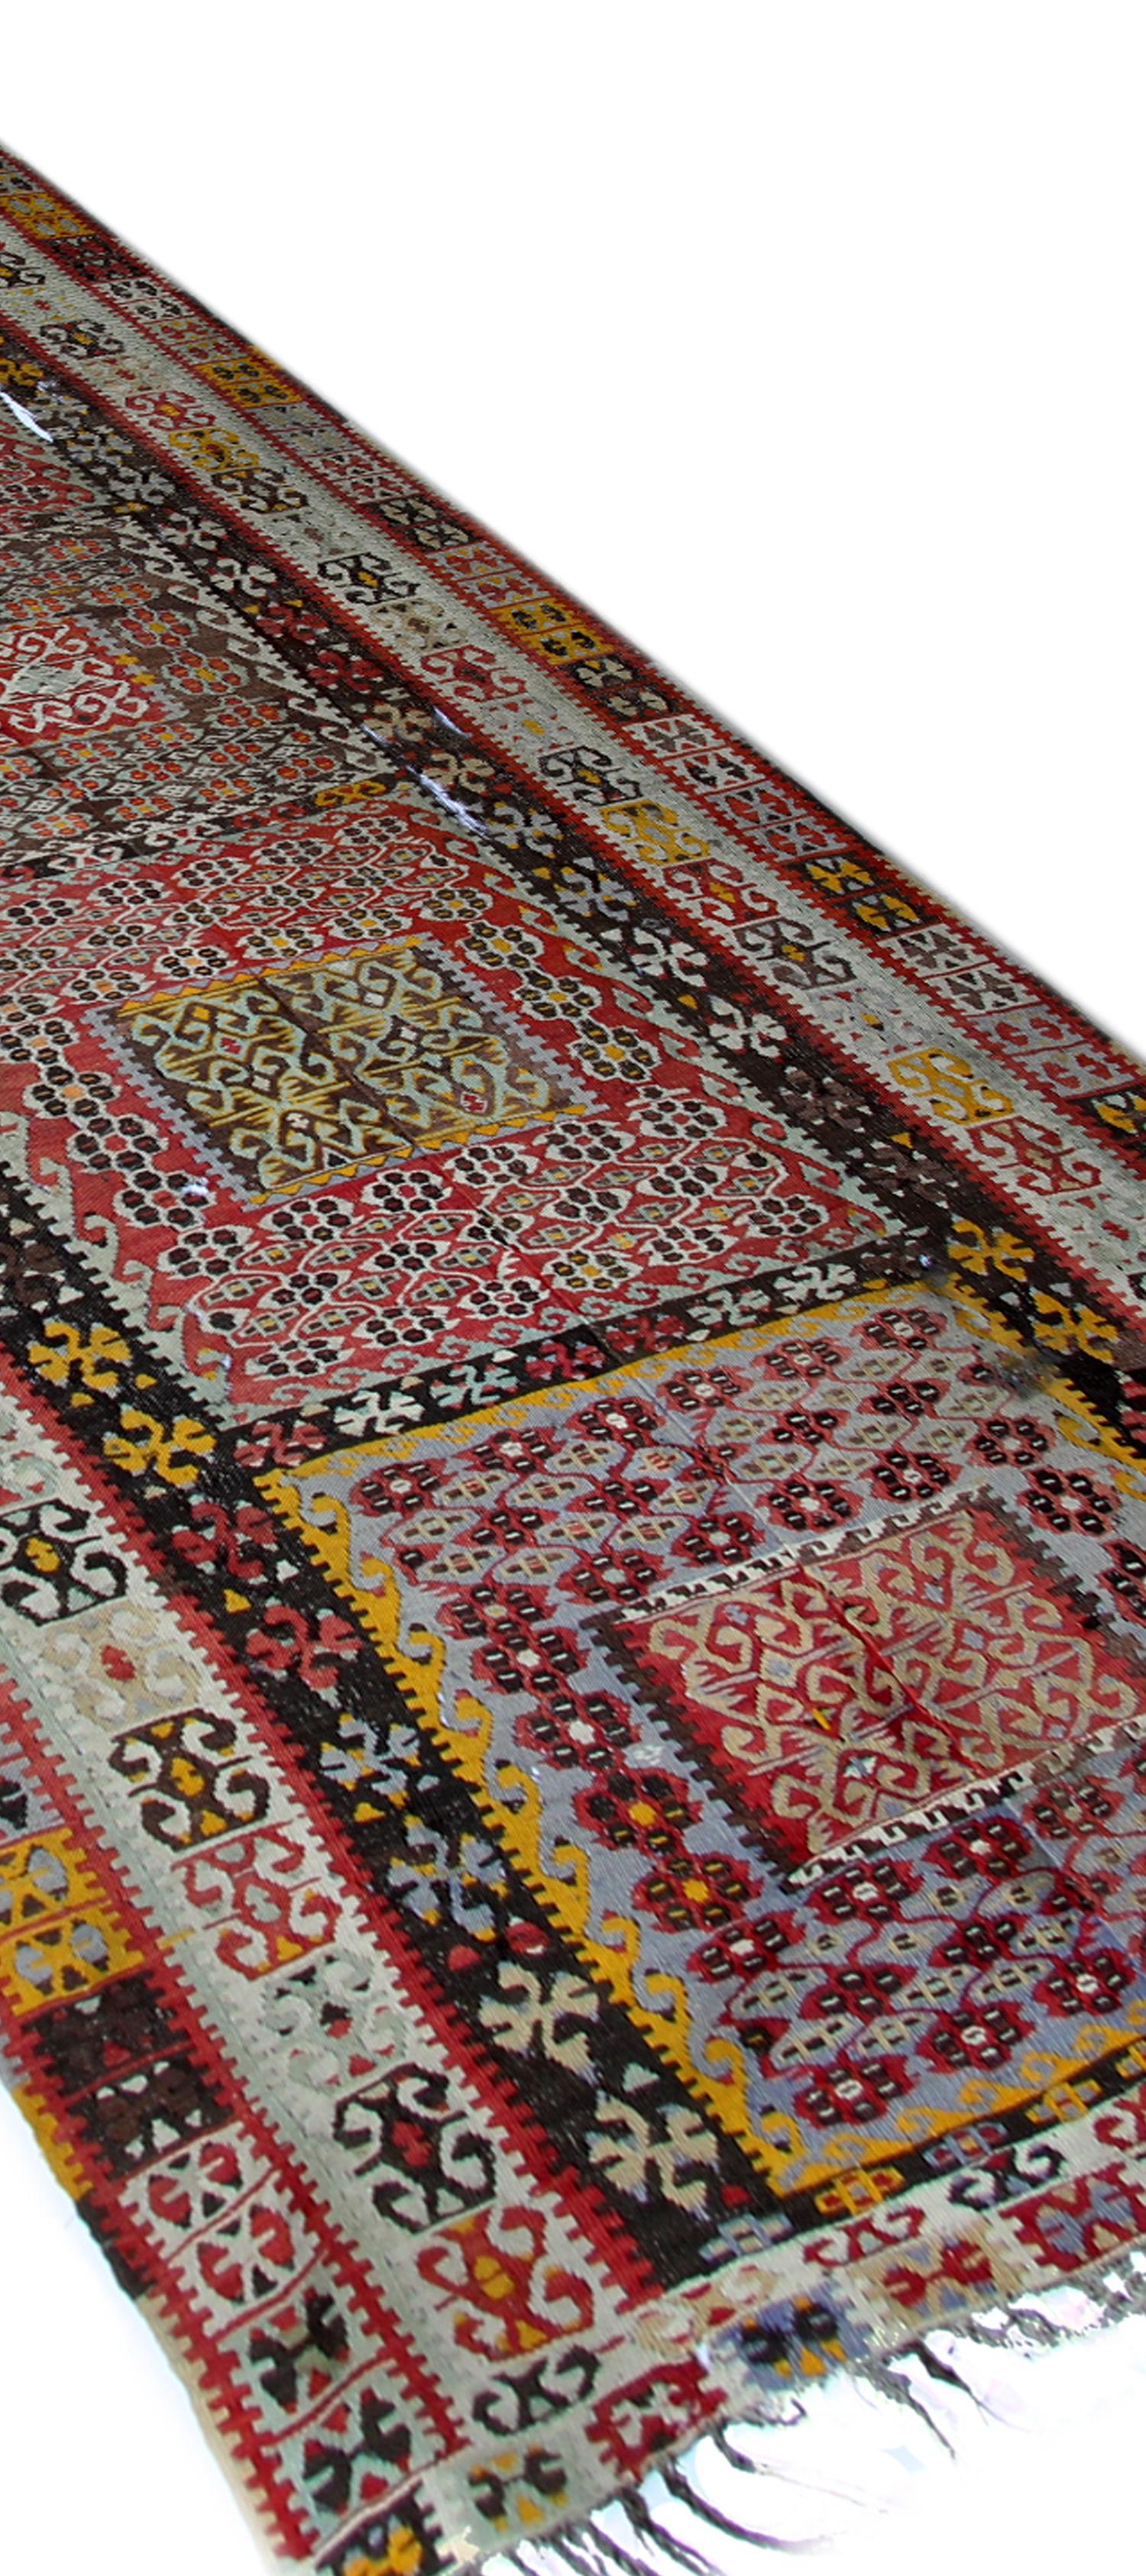 This highly decorative antique Turkish Kilim has been constructed using the finest handspun wool dyed in muted red, brown and ivory colours, using organic vegetable dyes. Featuring tribal motifs woven through the centre with a highly detailed border